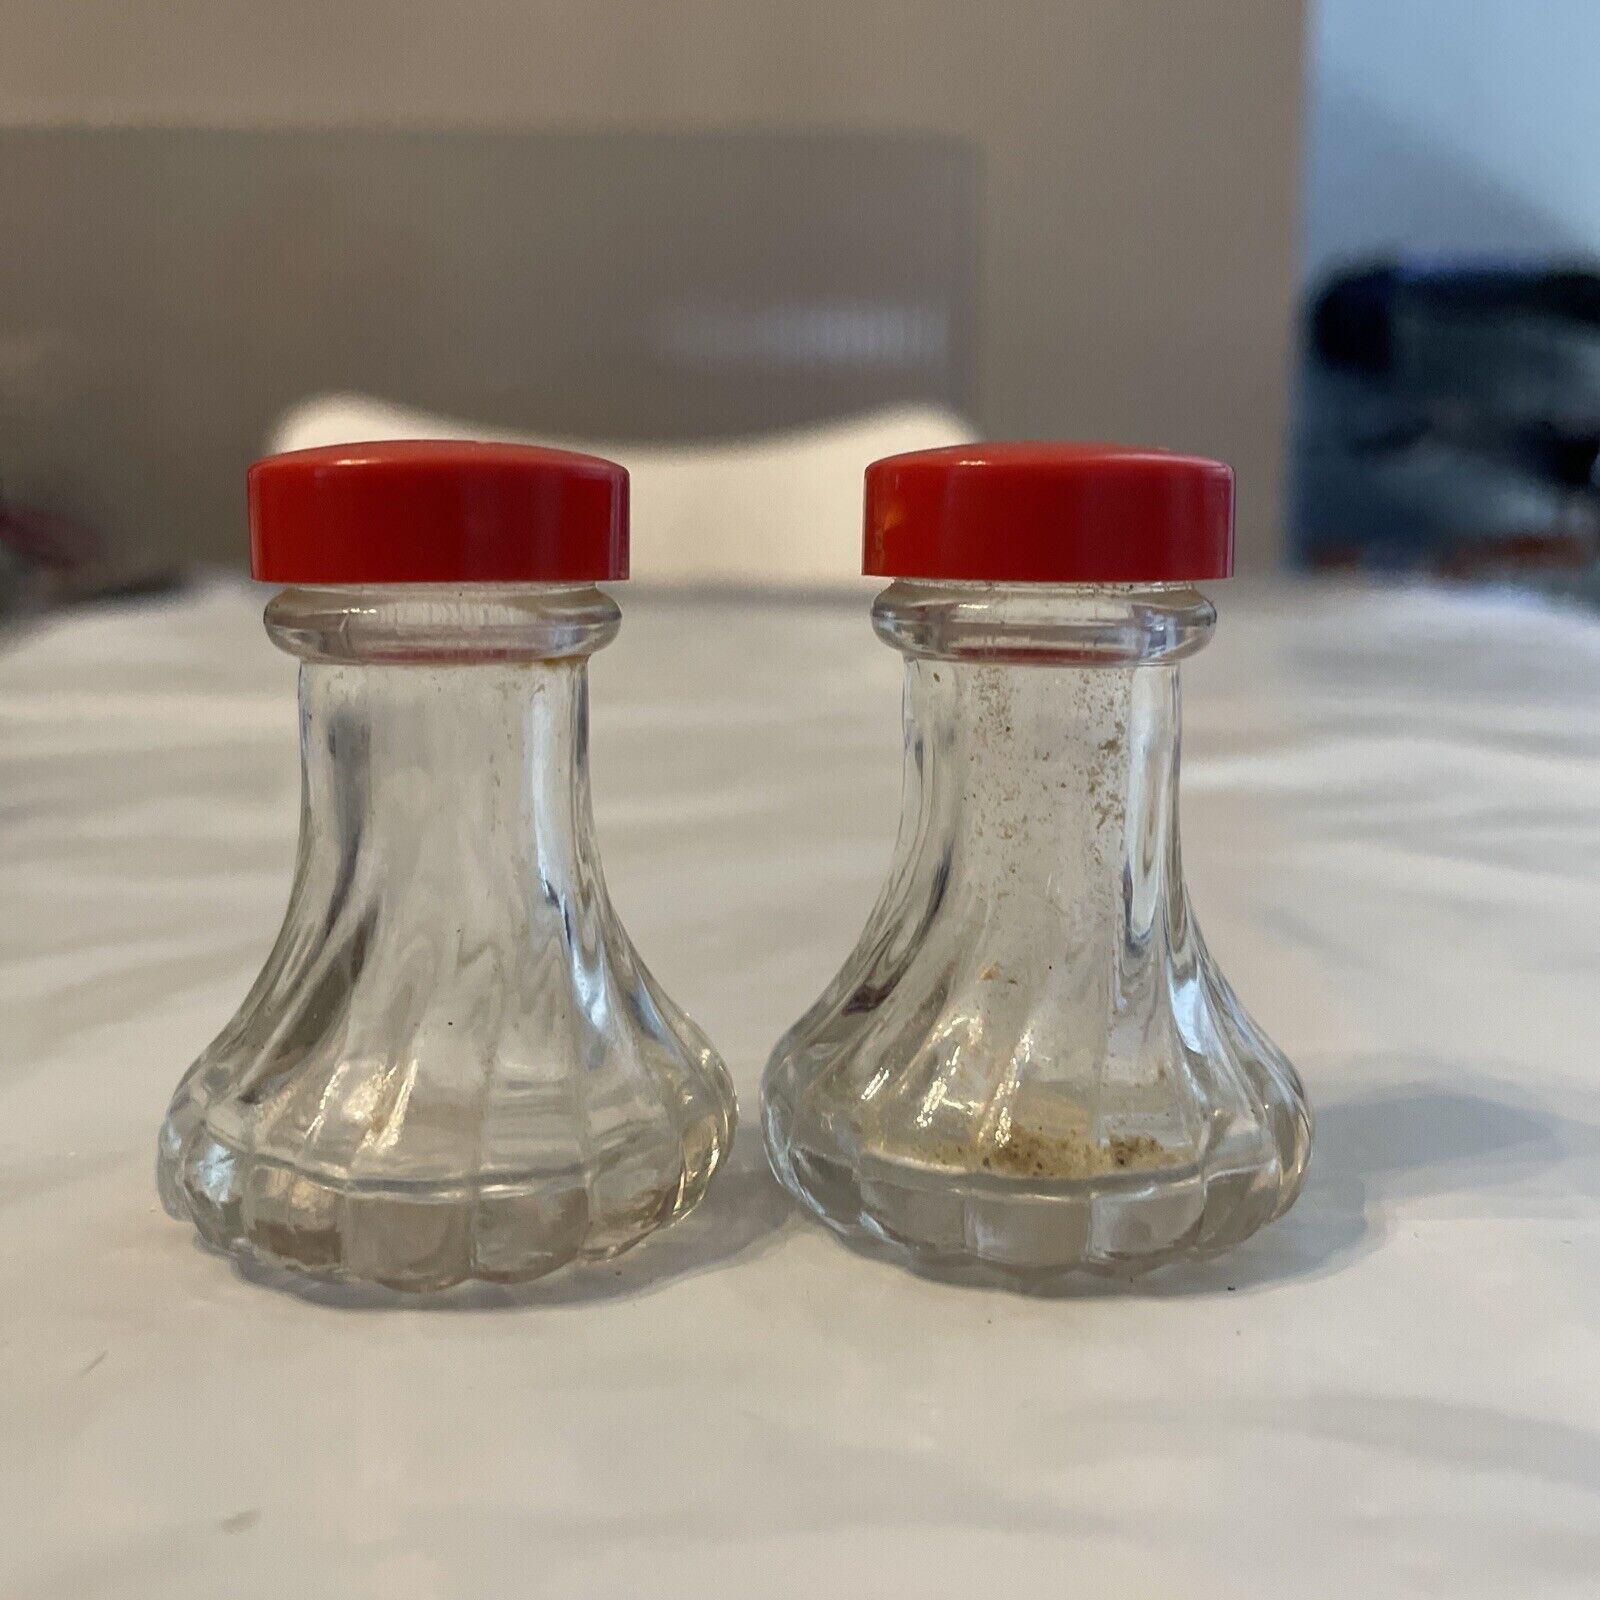 VGT clear salt & peper shakers red hard plastic caps. A 2. on the bottom. Detail